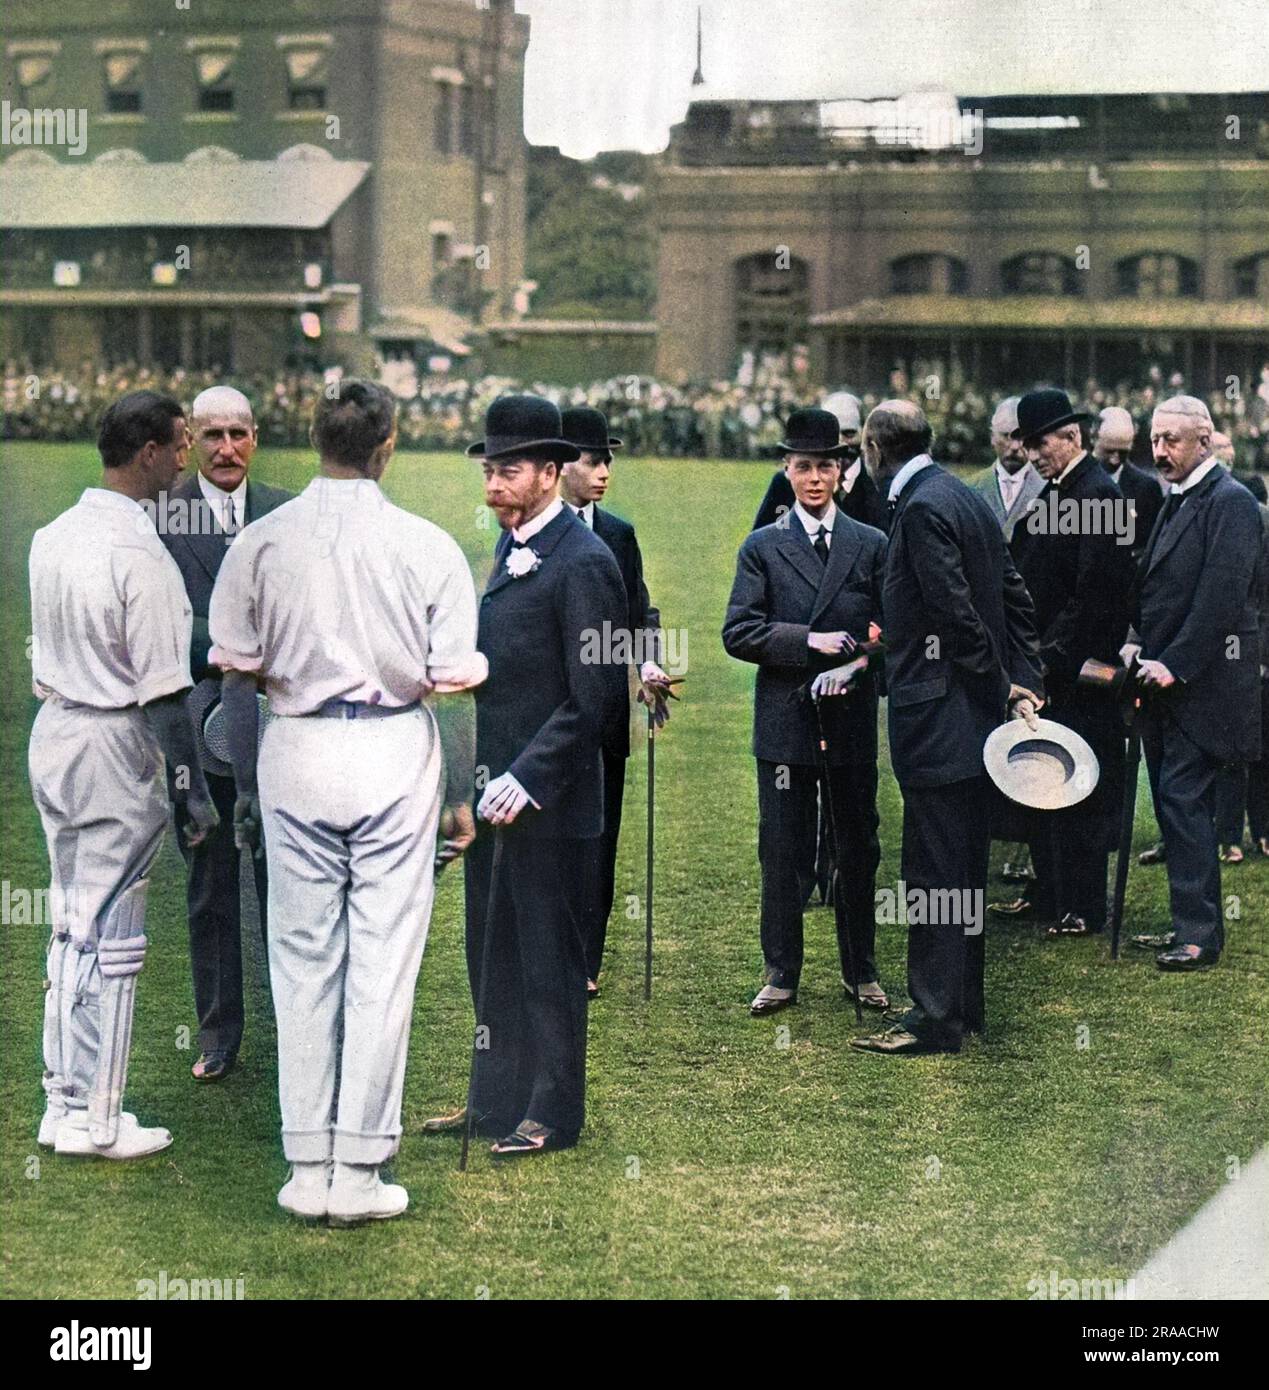 King George V and Edward, Prince of Wales (later King Edward VIII and then Duke of Windsor), pictured at Lord's cricket ground where its centenary was being celebrated in June 1914.  The occasion was marked by a match between M.C.C. South African heroes and the Rest of England.  The King is pictured chatting to Mr C. B. Fry, Mr Johnny Douglas and Lord Hawke.  Prince Albert (later King George VI) is seen just behind the King, and the Prince of Wales is talking to Mr F. E. Lacey.  On the right are Sir C. Cust and the Duke of Devonshire.     Date: 1914 Stock Photo